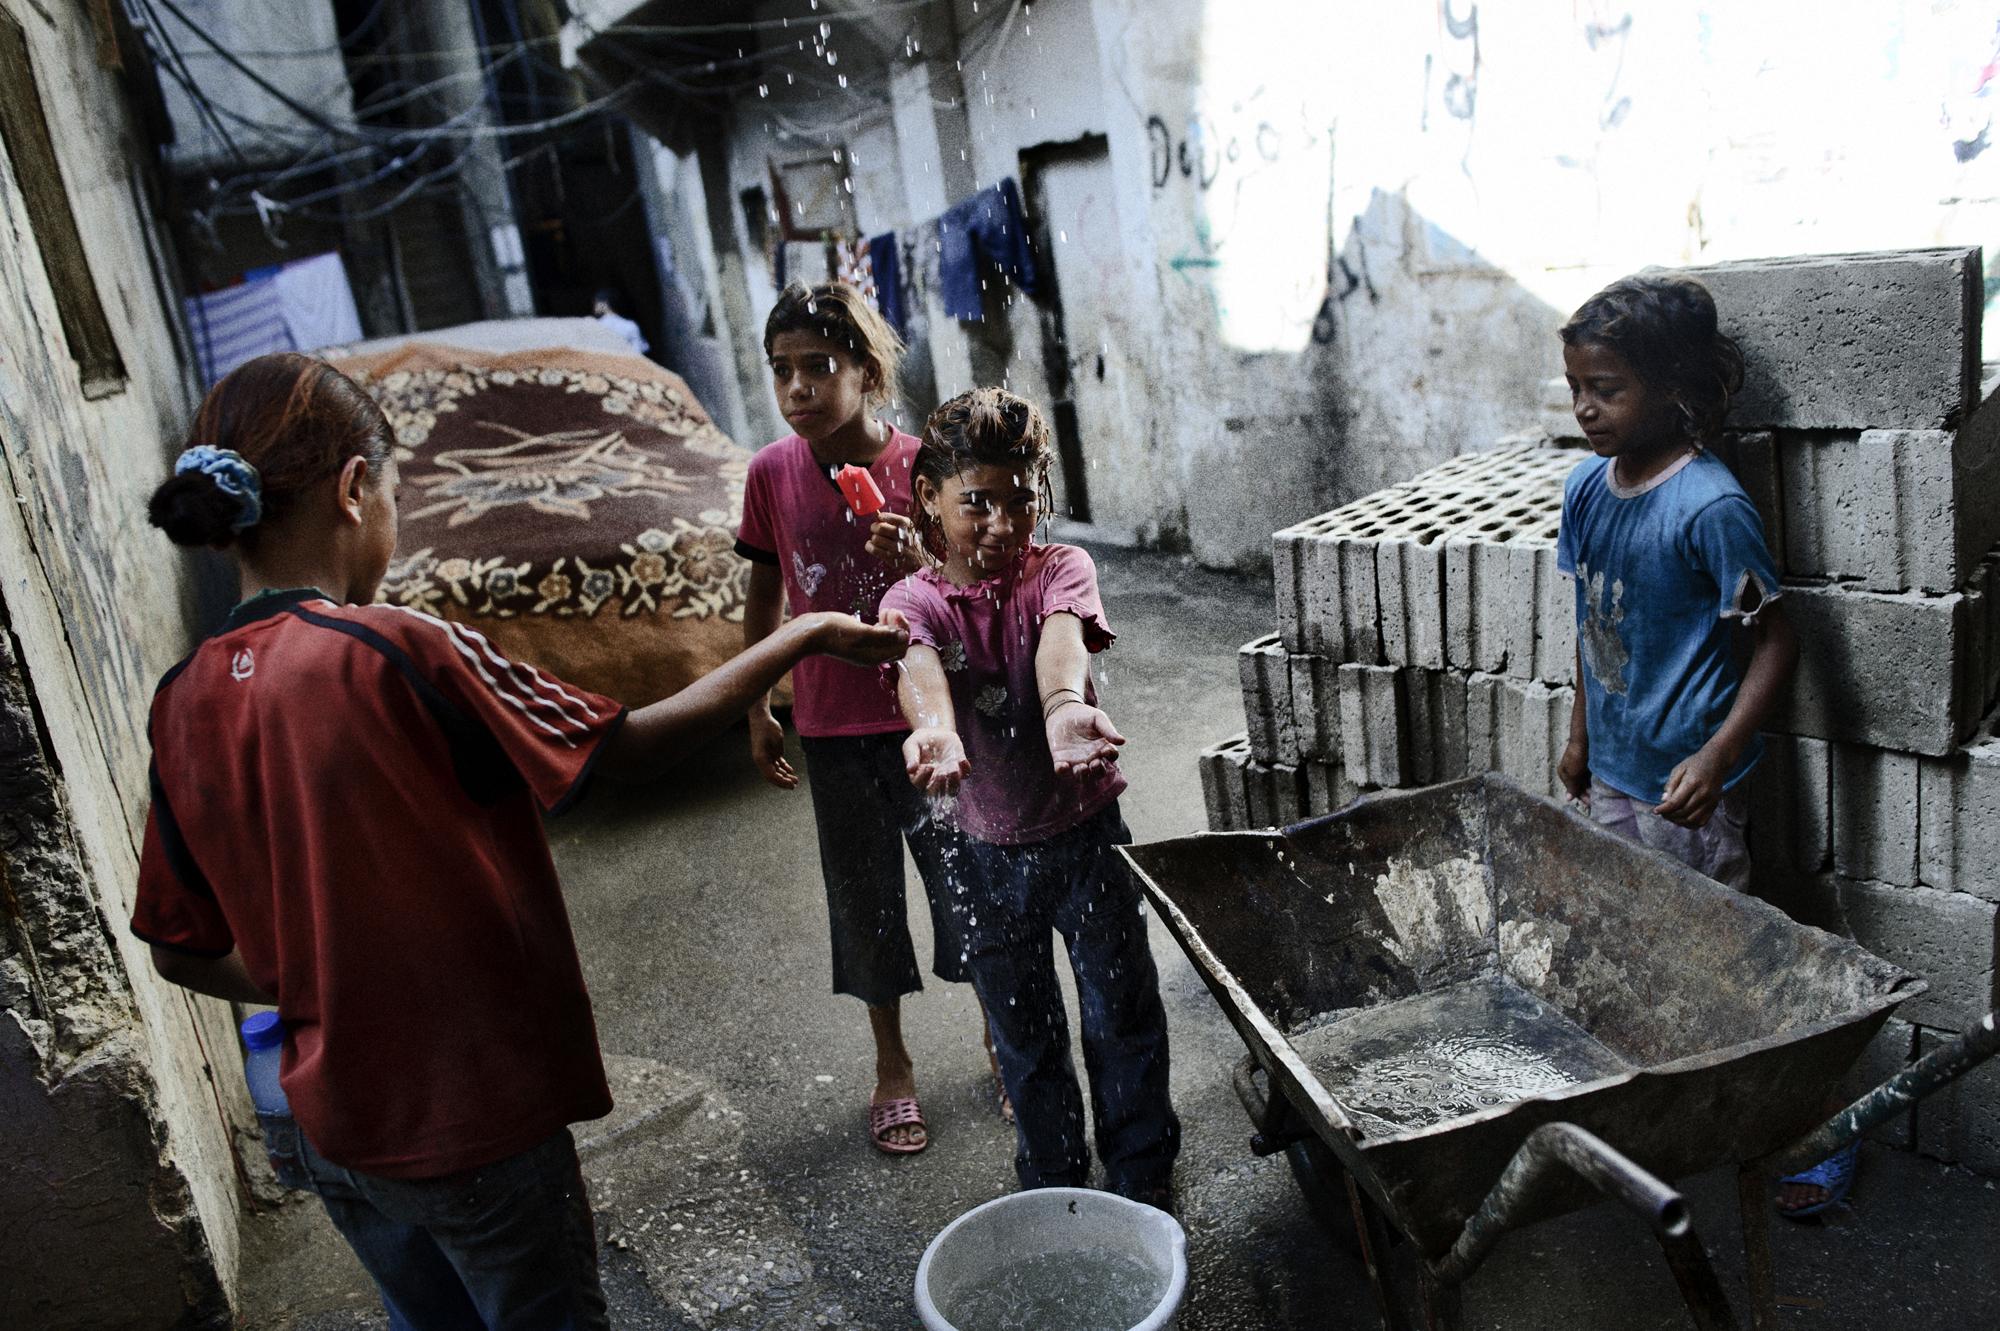 Young Syrian refugees collect water from a leaking water hose in the overcrowded Beirut outskirts Sabra and Shatila in Lebanon, home to refugees...